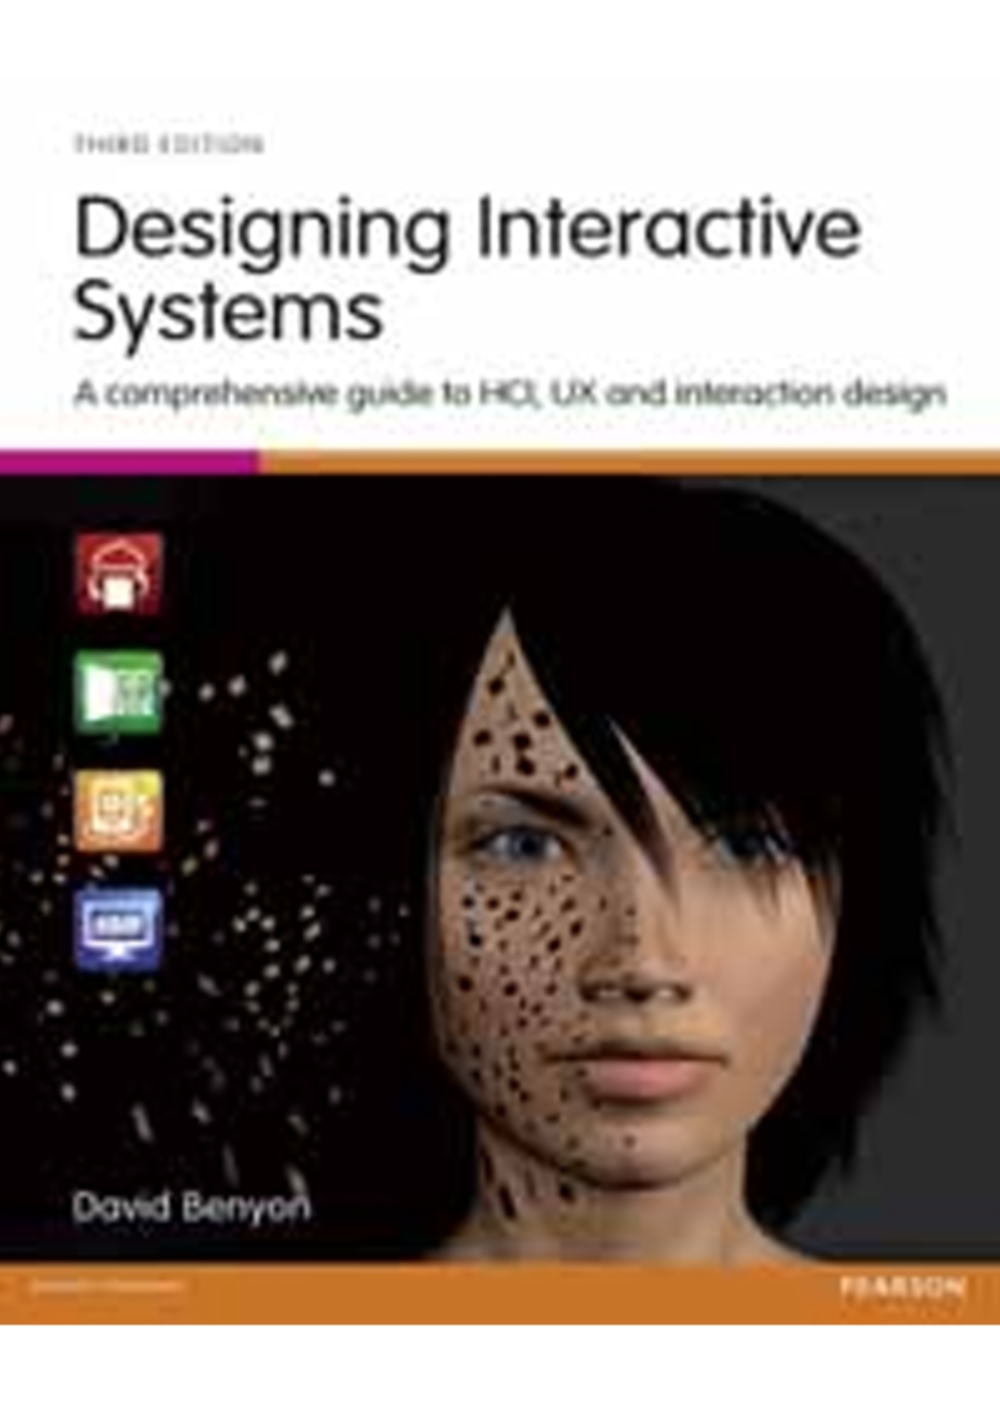 DESIGNING INTERACTIVE SYSTEMS: A COMPREHENSIVE GUIDE to HCI, UX AND INTERACTION DESIGN 3/E